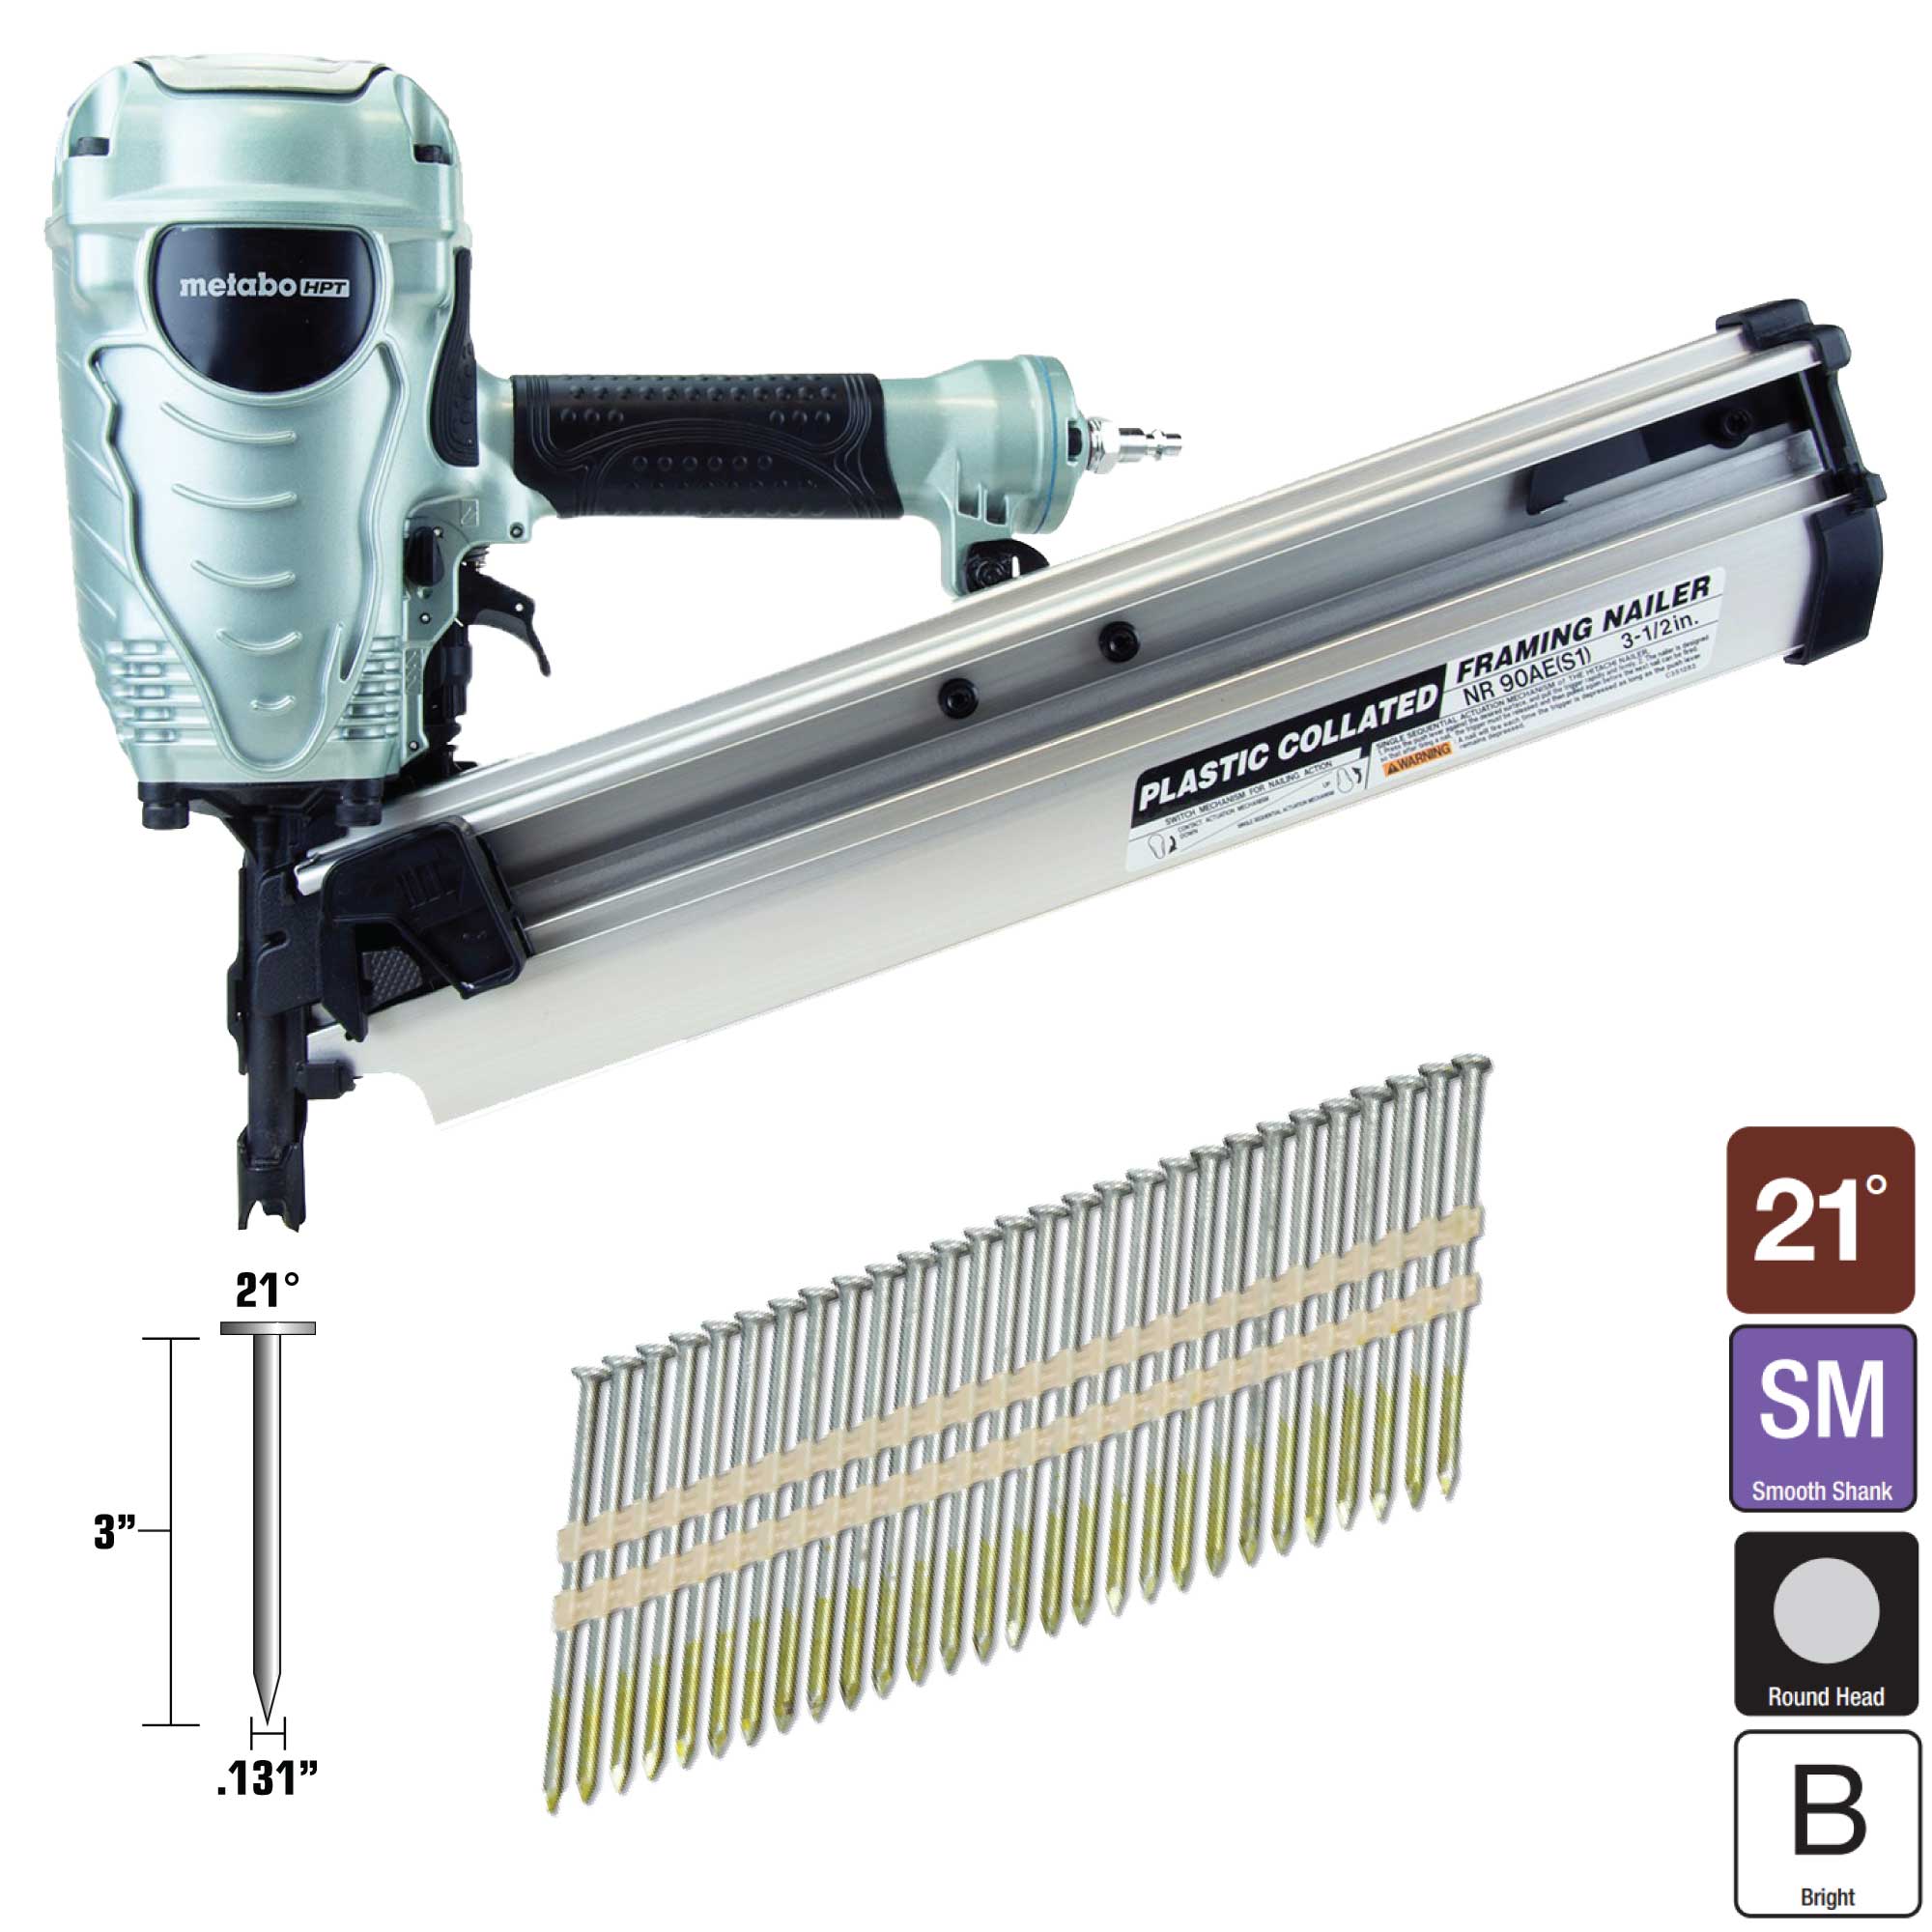 what nails are compatible with metabo nail gun? 2